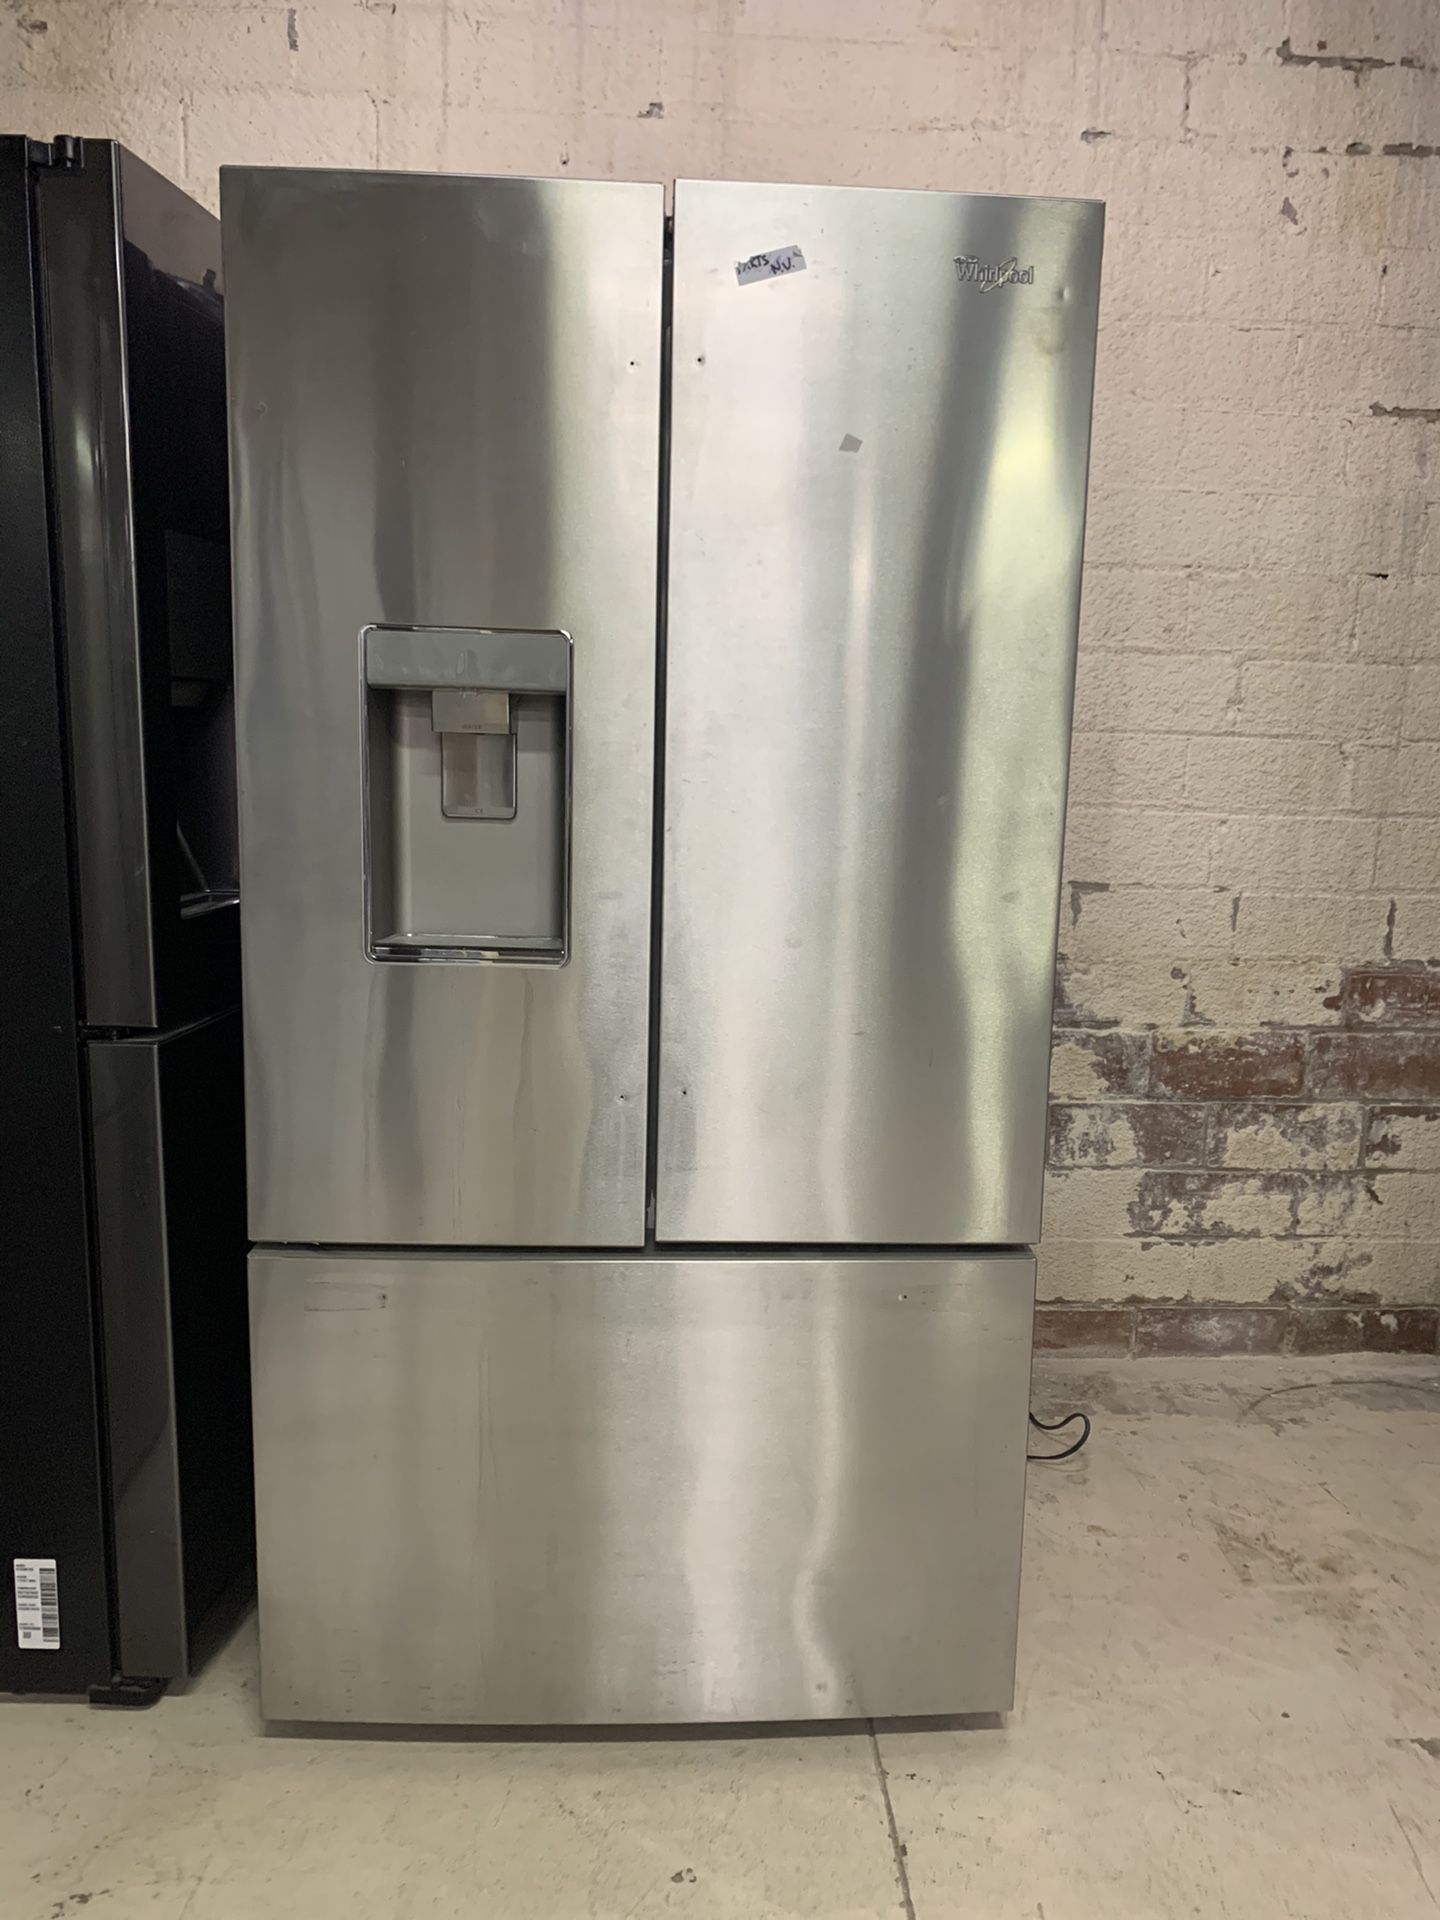 WHIRLPOOL FRENCH DOOR REFRIGERATOR NOT COOLING 